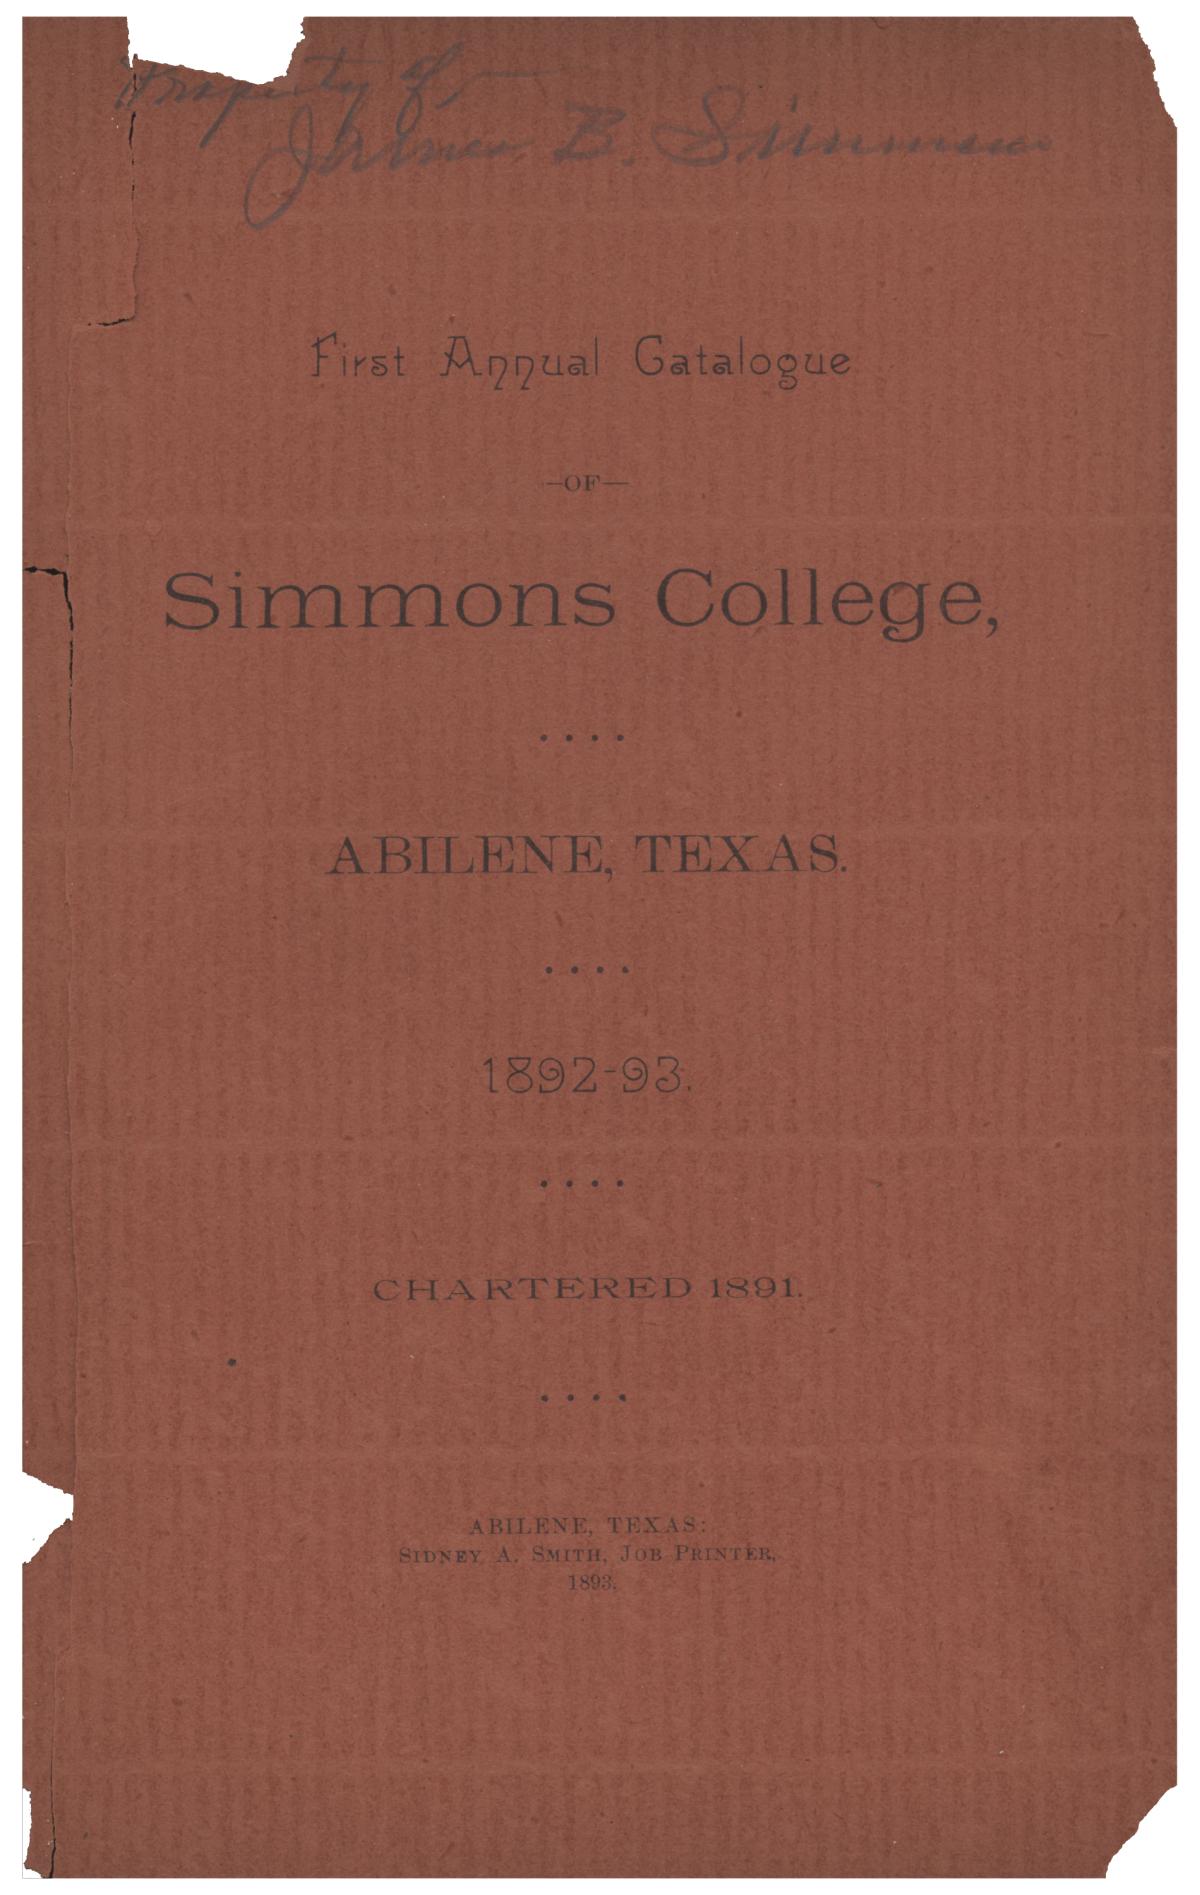 Catalogue of Simmons College, 1892-1893
                                                
                                                    Front Cover
                                                